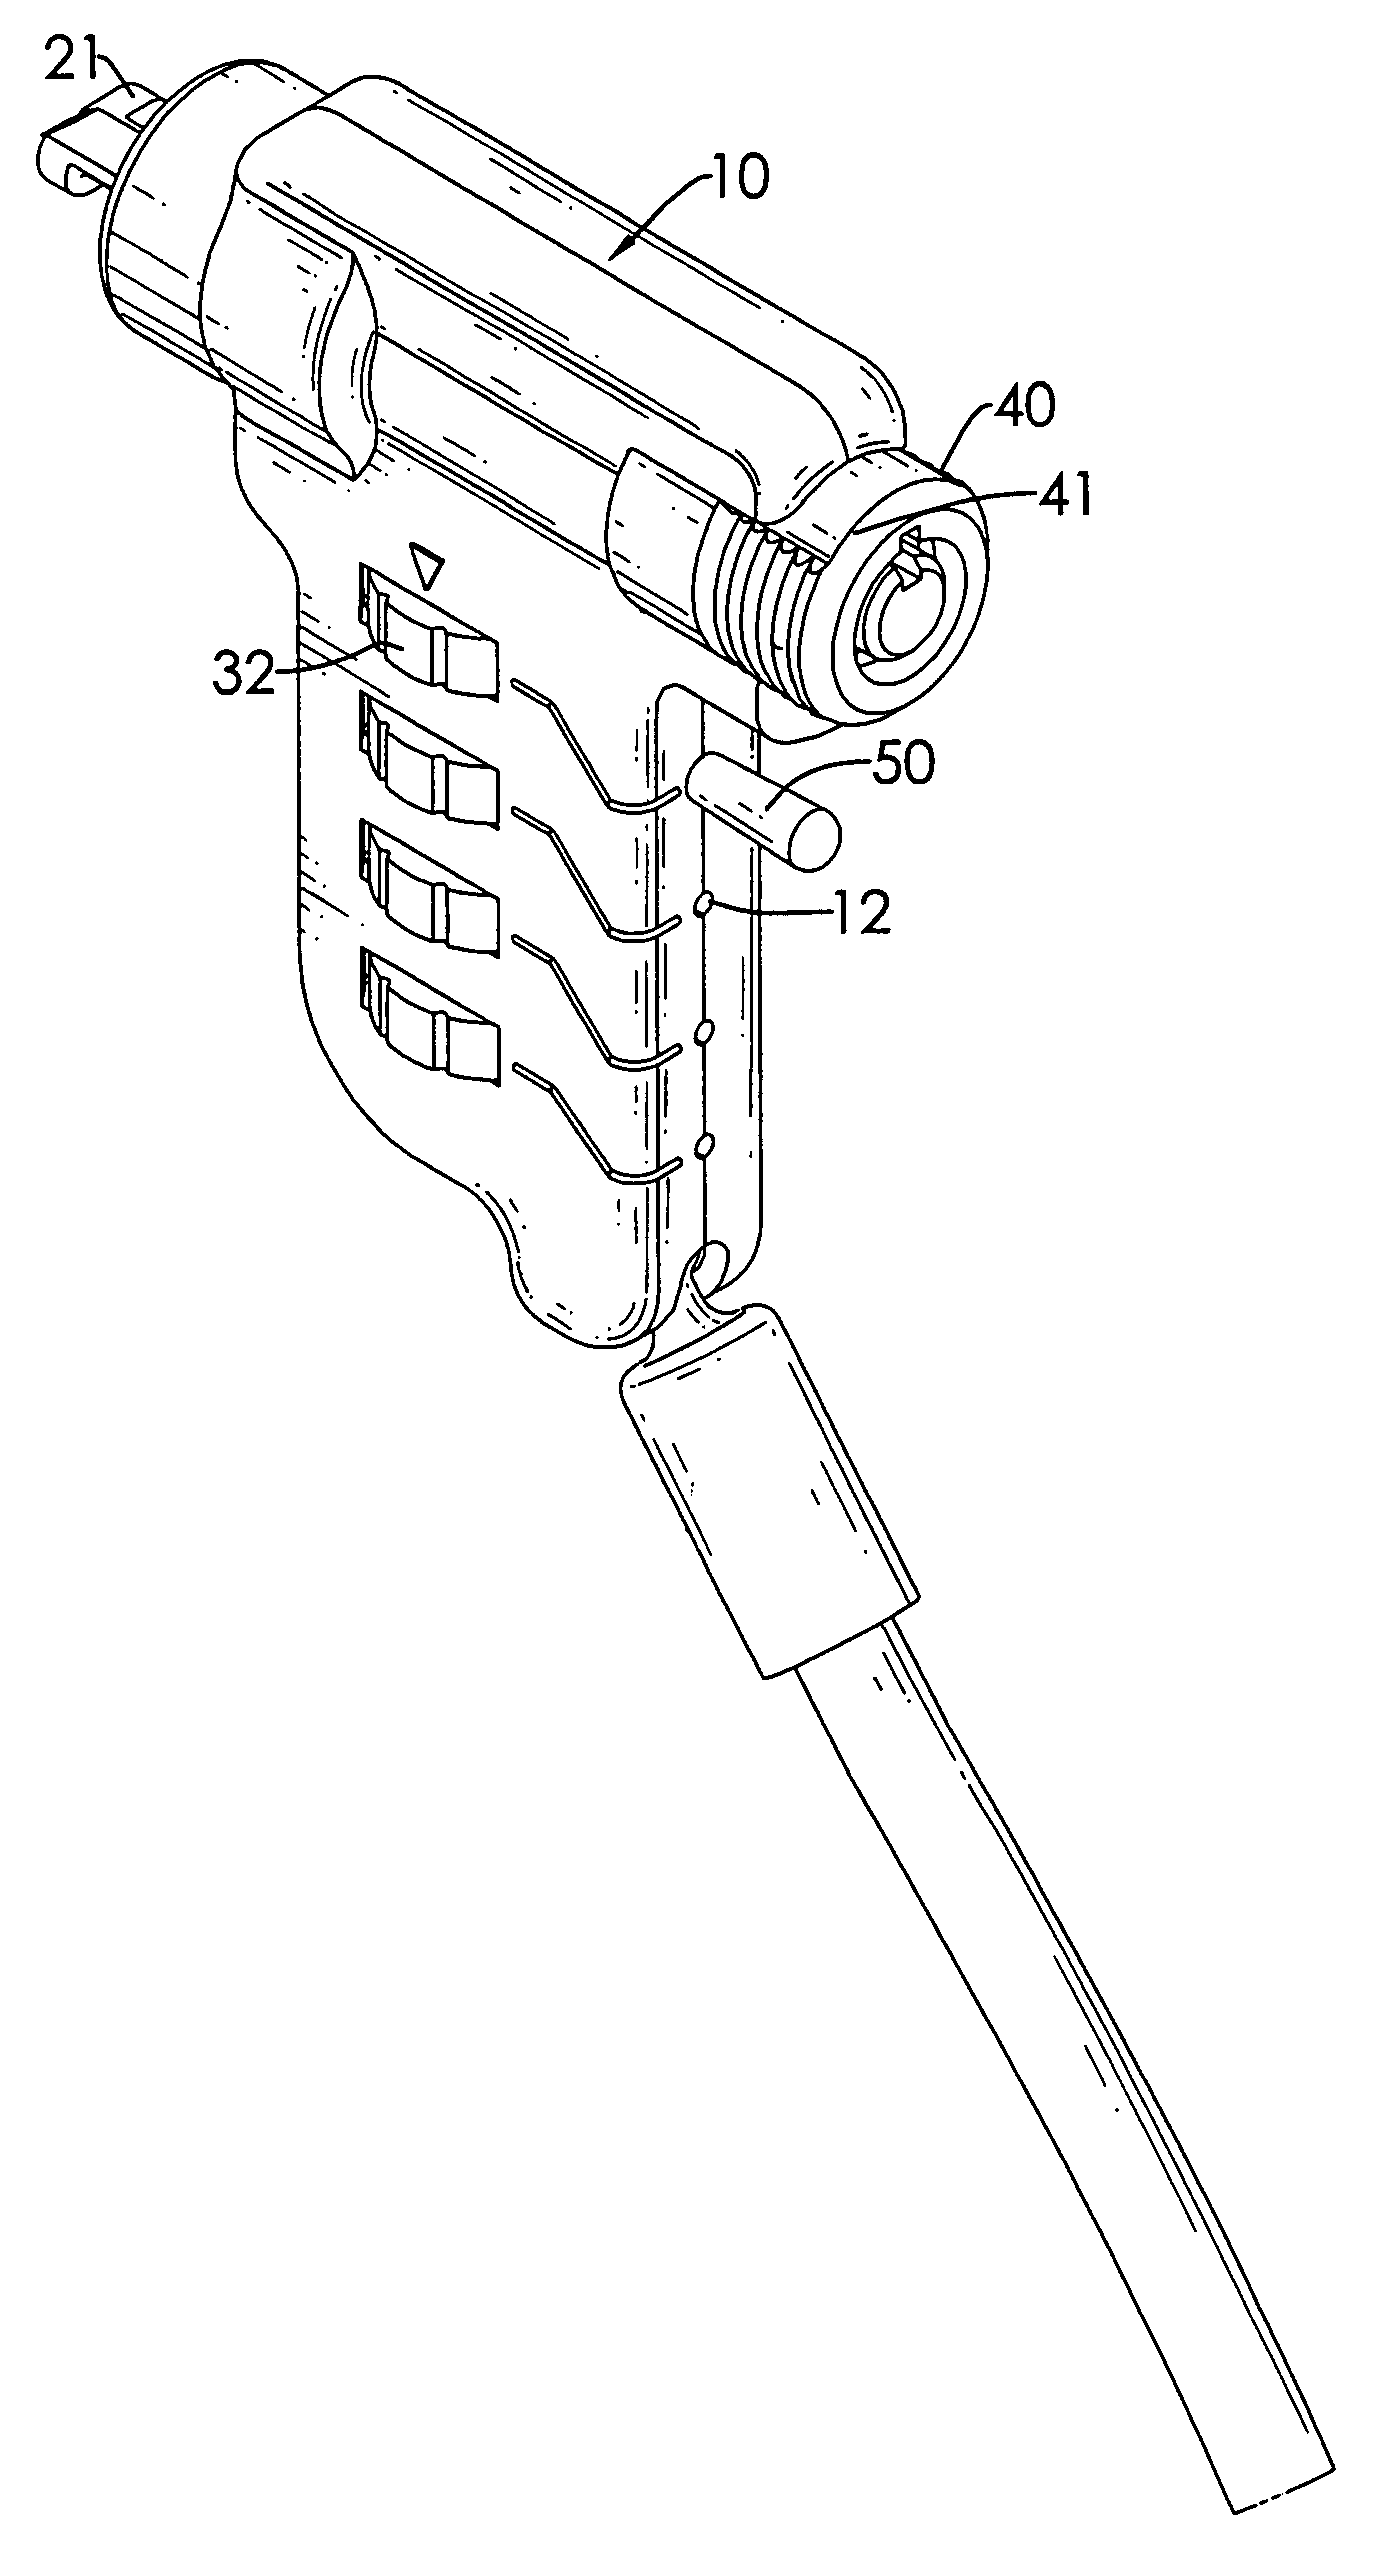 Dual-mode lock with a combination identification function